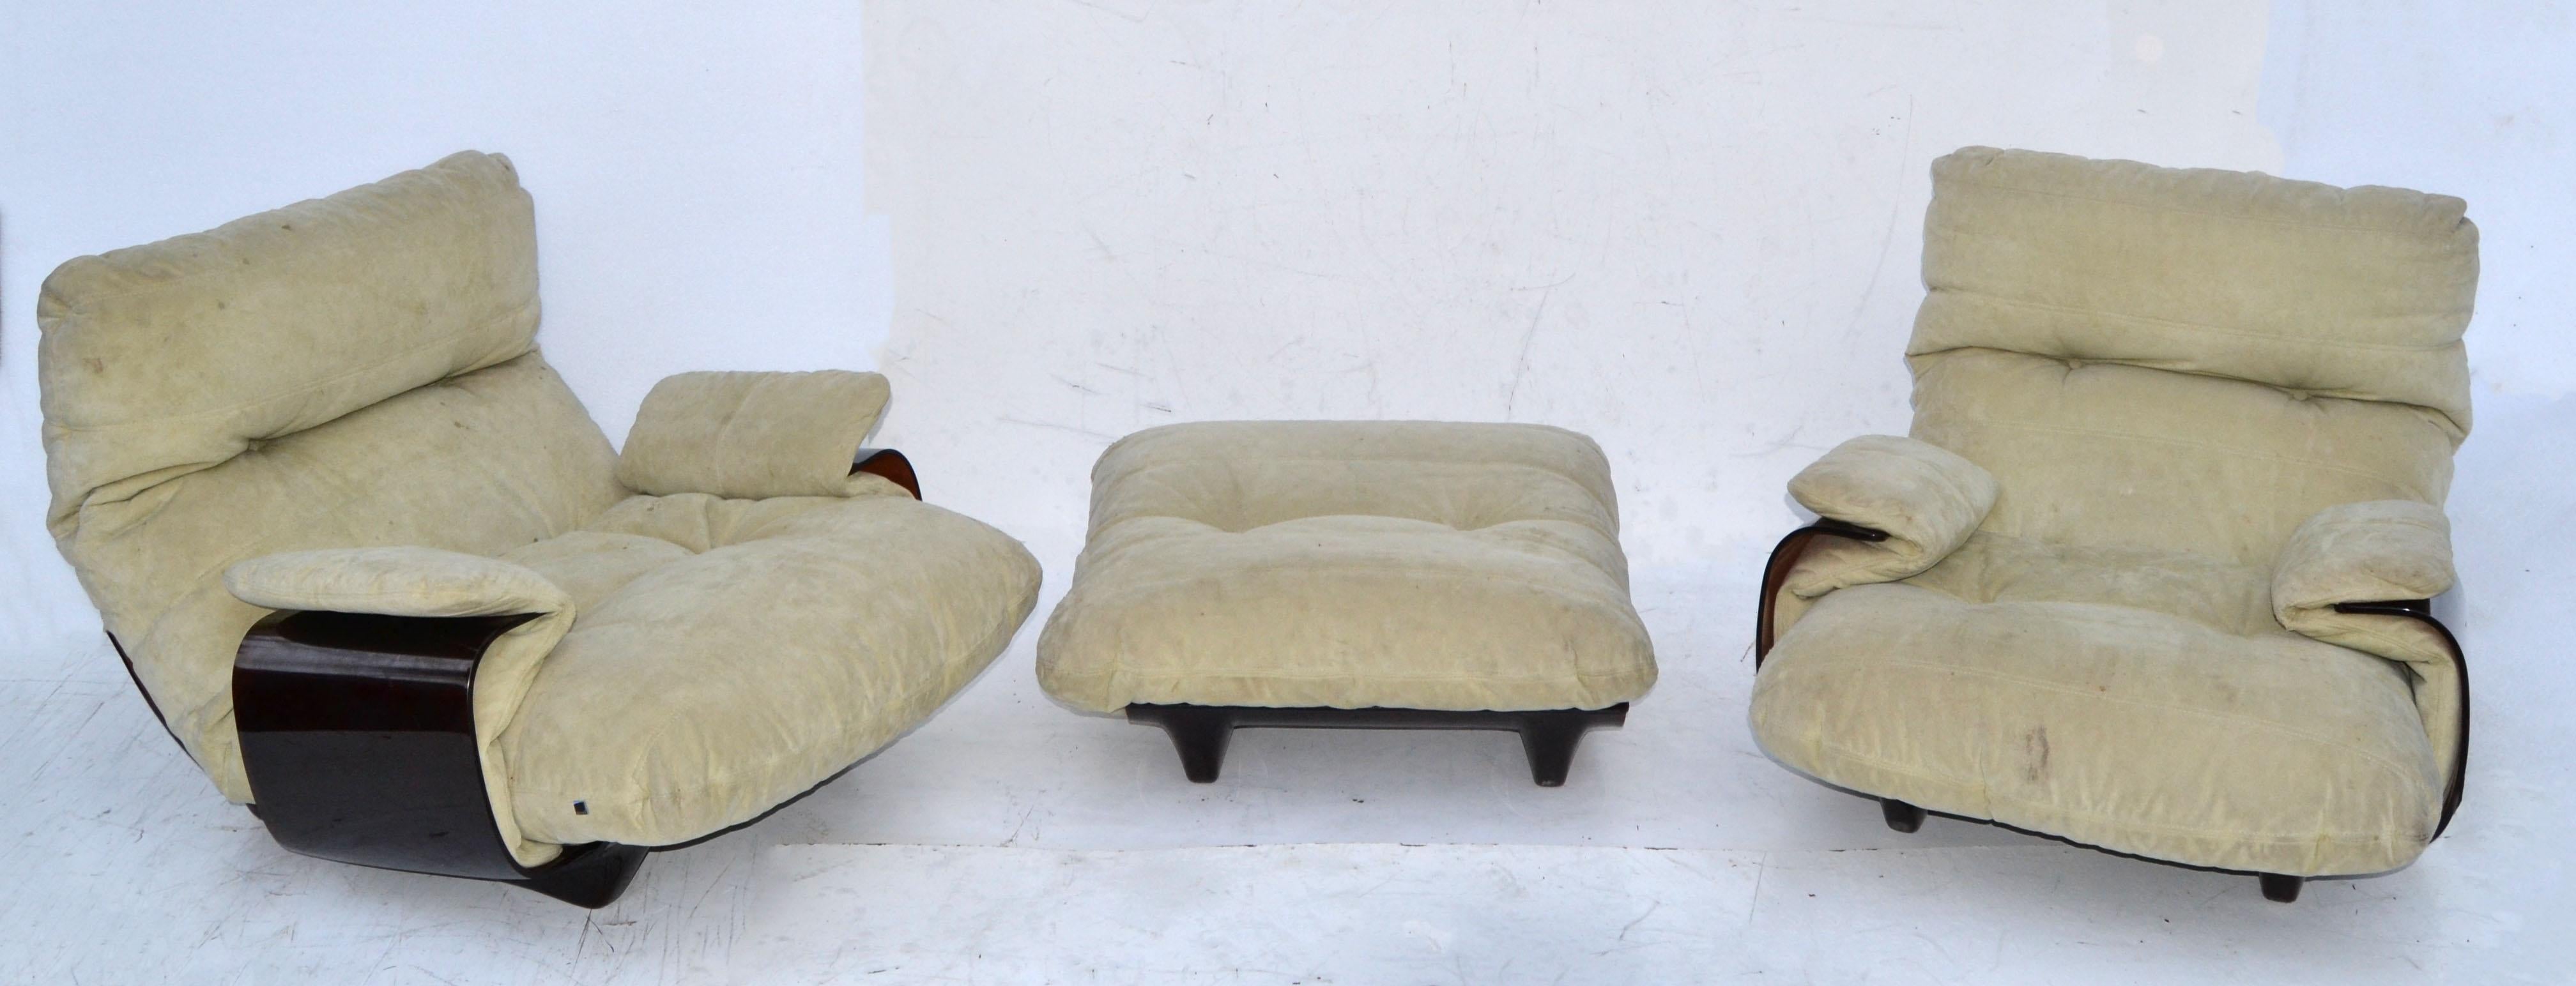 We offer a pair of French Mid-Century Modern 'Marsala' lounge chairs with matching Ottoman by Michel Ducaroy for Ligne Roset. 
The chair features a curved bronze transparent Lucite base and has still the original beige ultra-suede